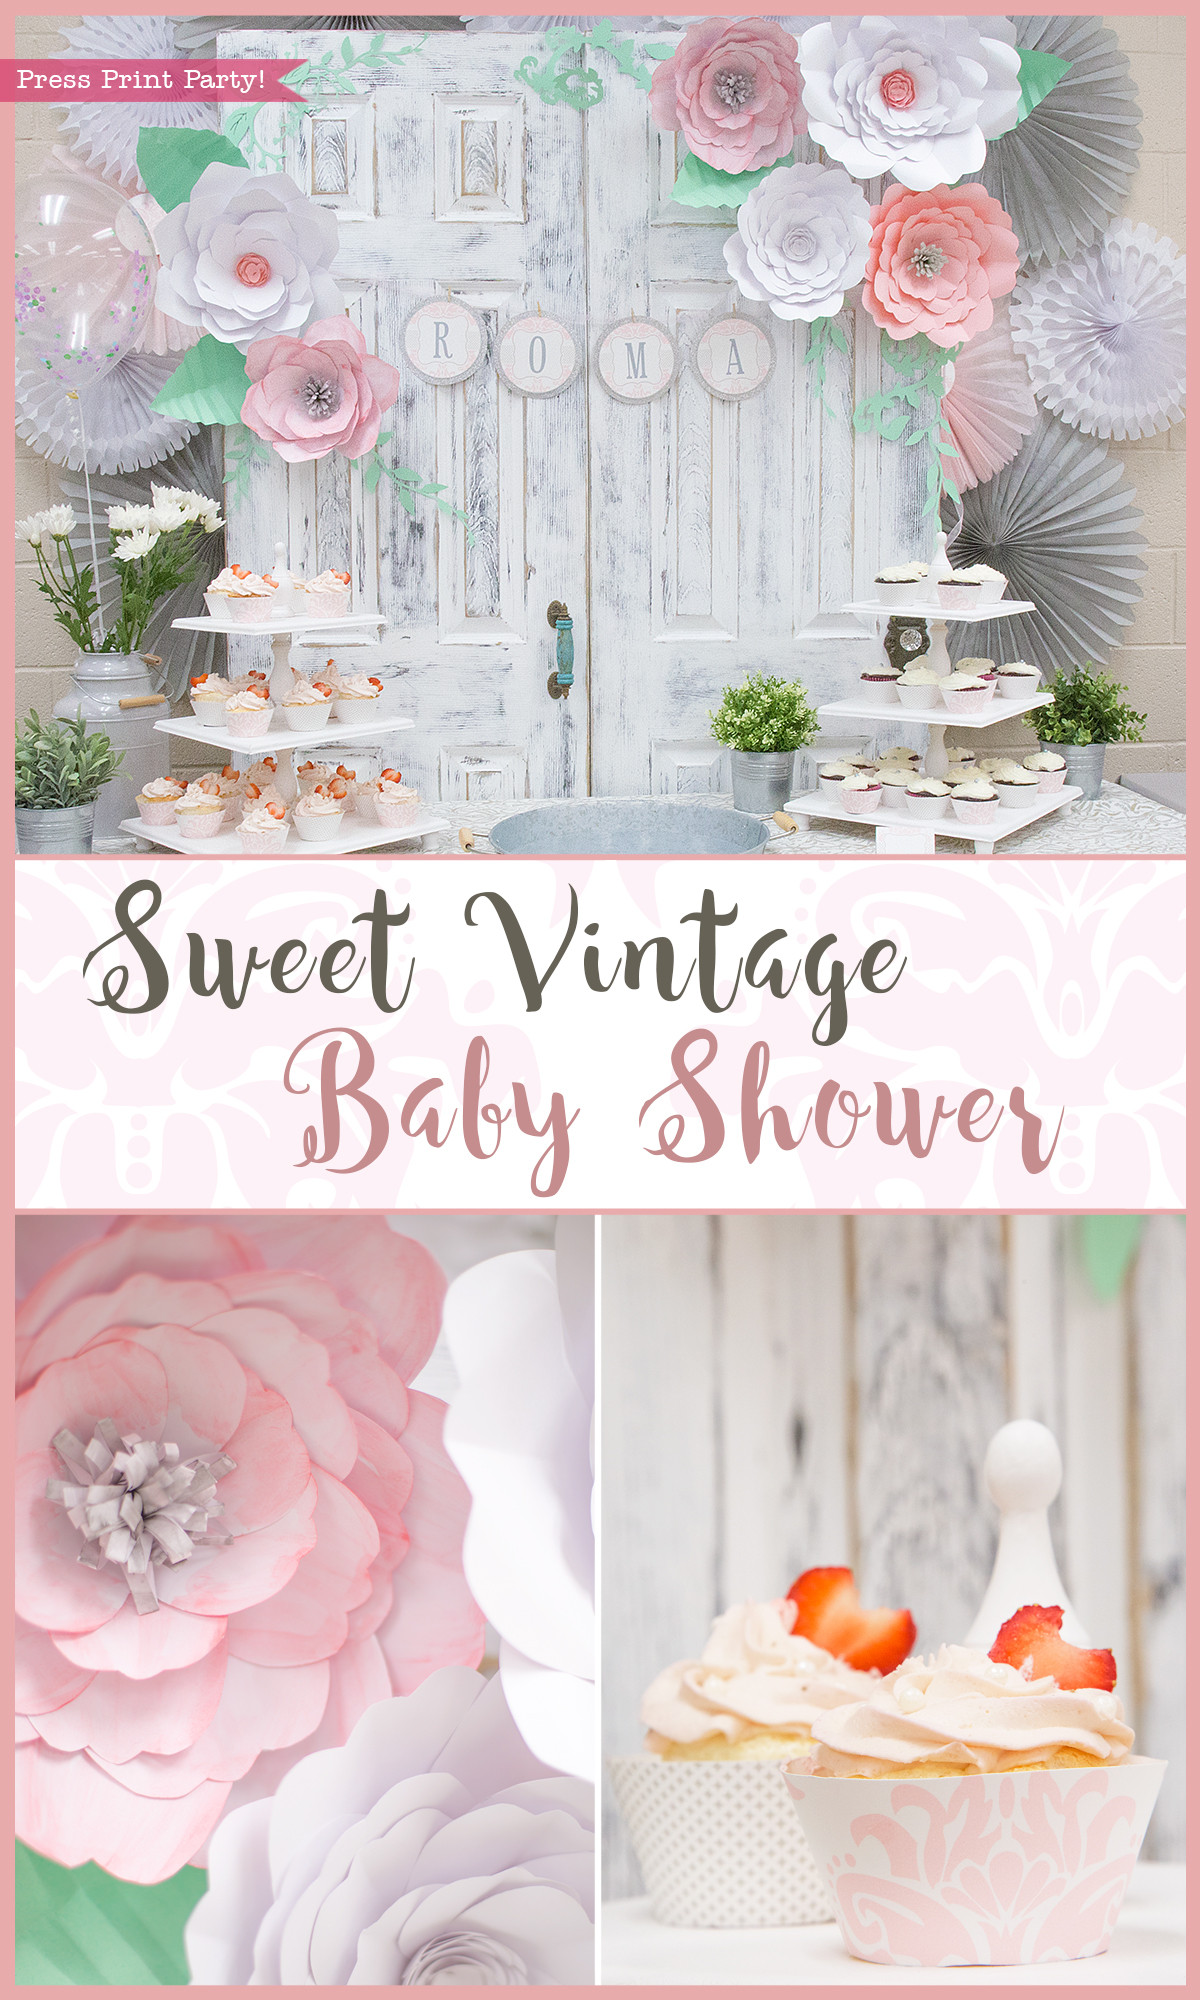 Baby Shower Decorating Ideas
 A Sweet Vintage Baby Shower By Press Print Party